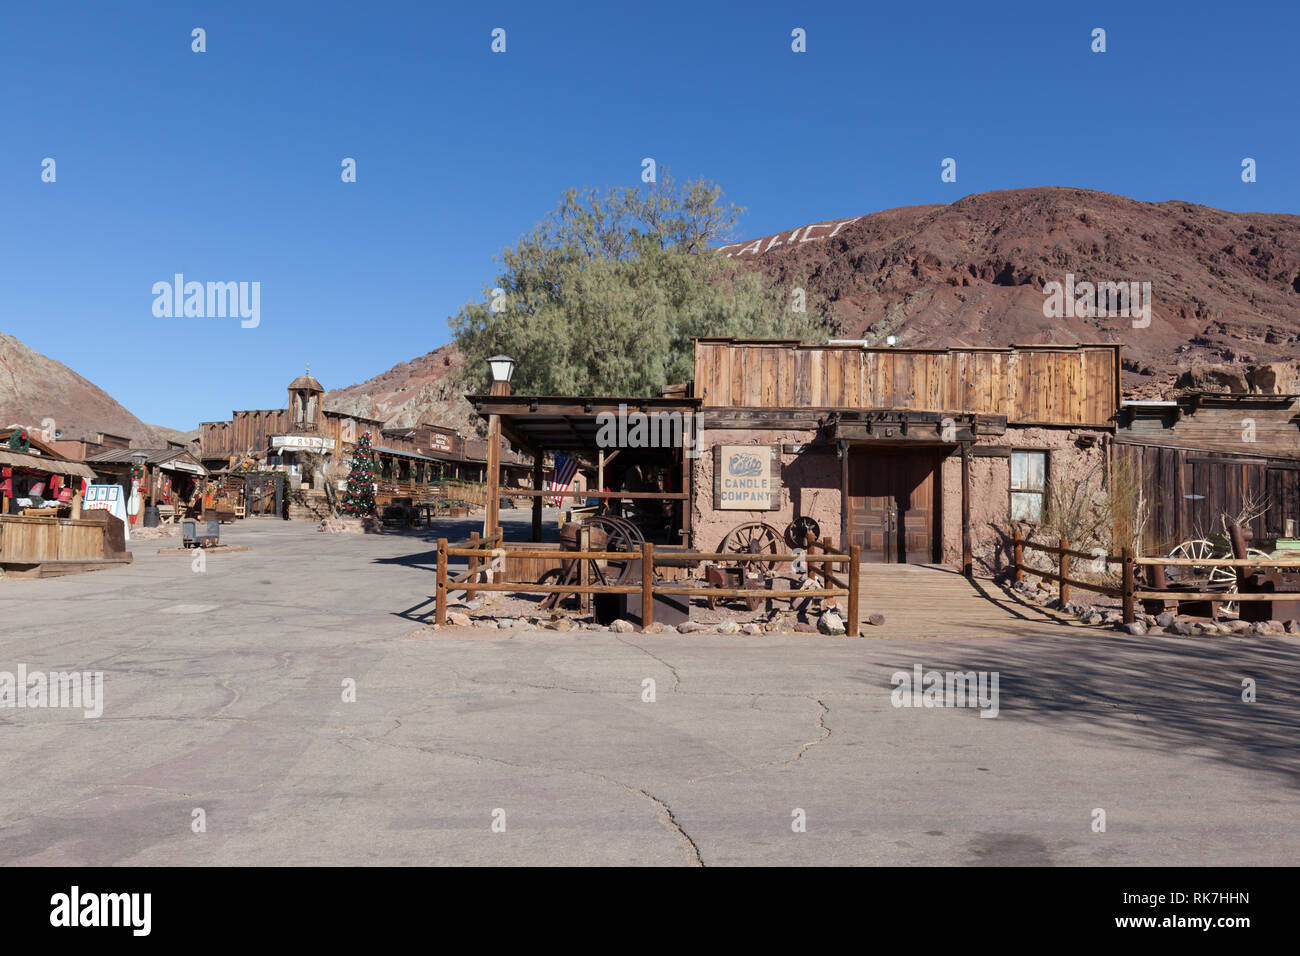 Calico ghost town. Founded in 1881, Calico is a former silver mining town in San Bernardino County, California, United States. Stock Photo